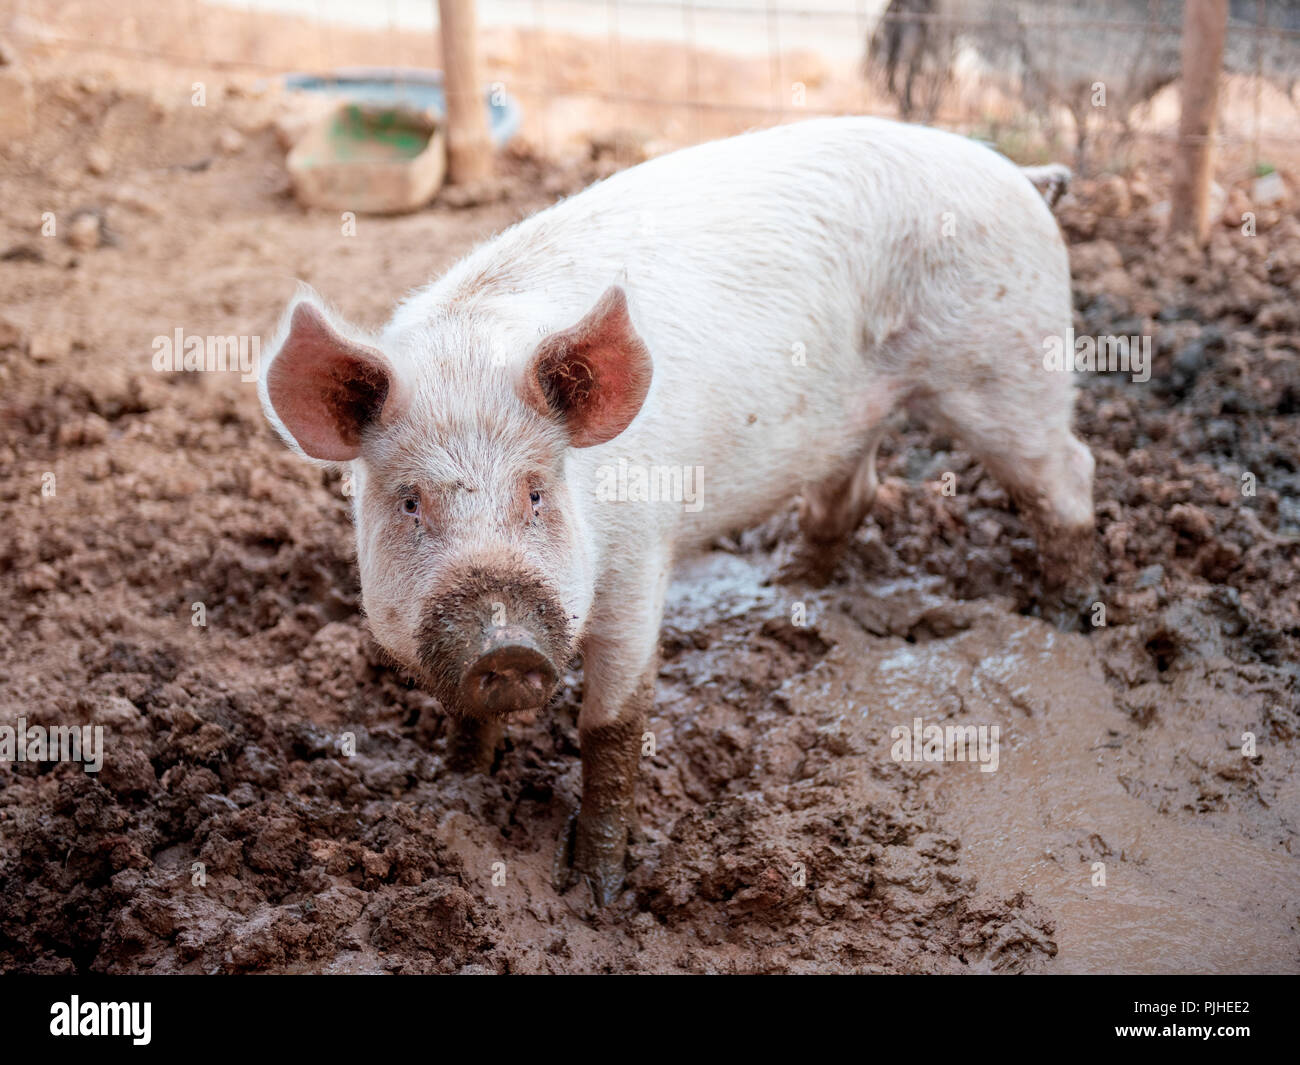 Young pink pig in a dirty pigsty alone Stock Photo